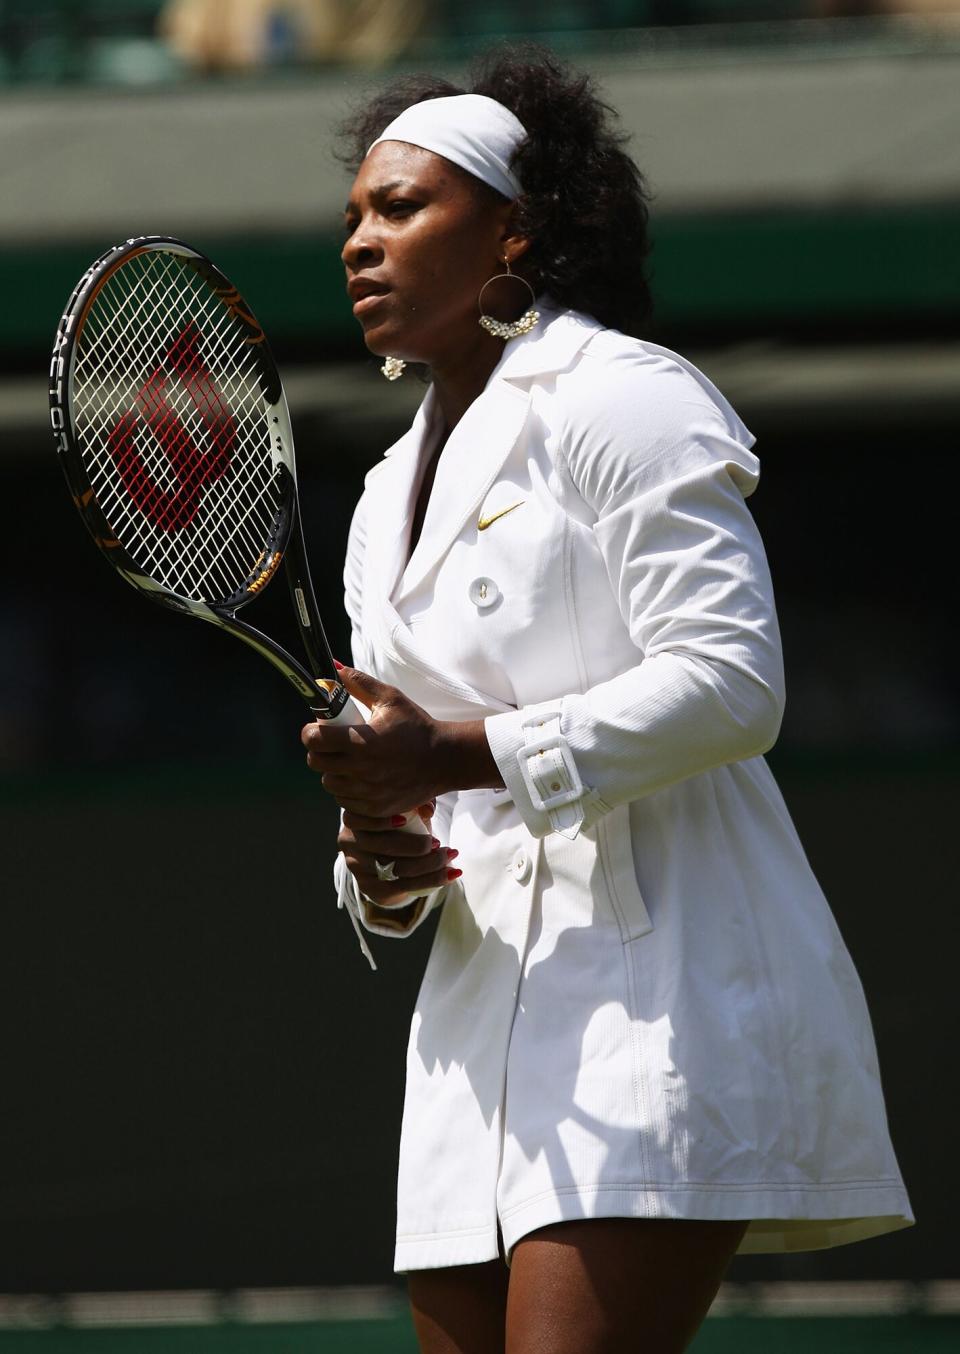 Serena Williams of United States prepares for her women's singles round one match against Kaia Kanepi of Estonia on day one of the Wimbledon Lawn Tennis Championships at the All England Lawn Tennis and Croquet Club on June 23, 2008 in London, England